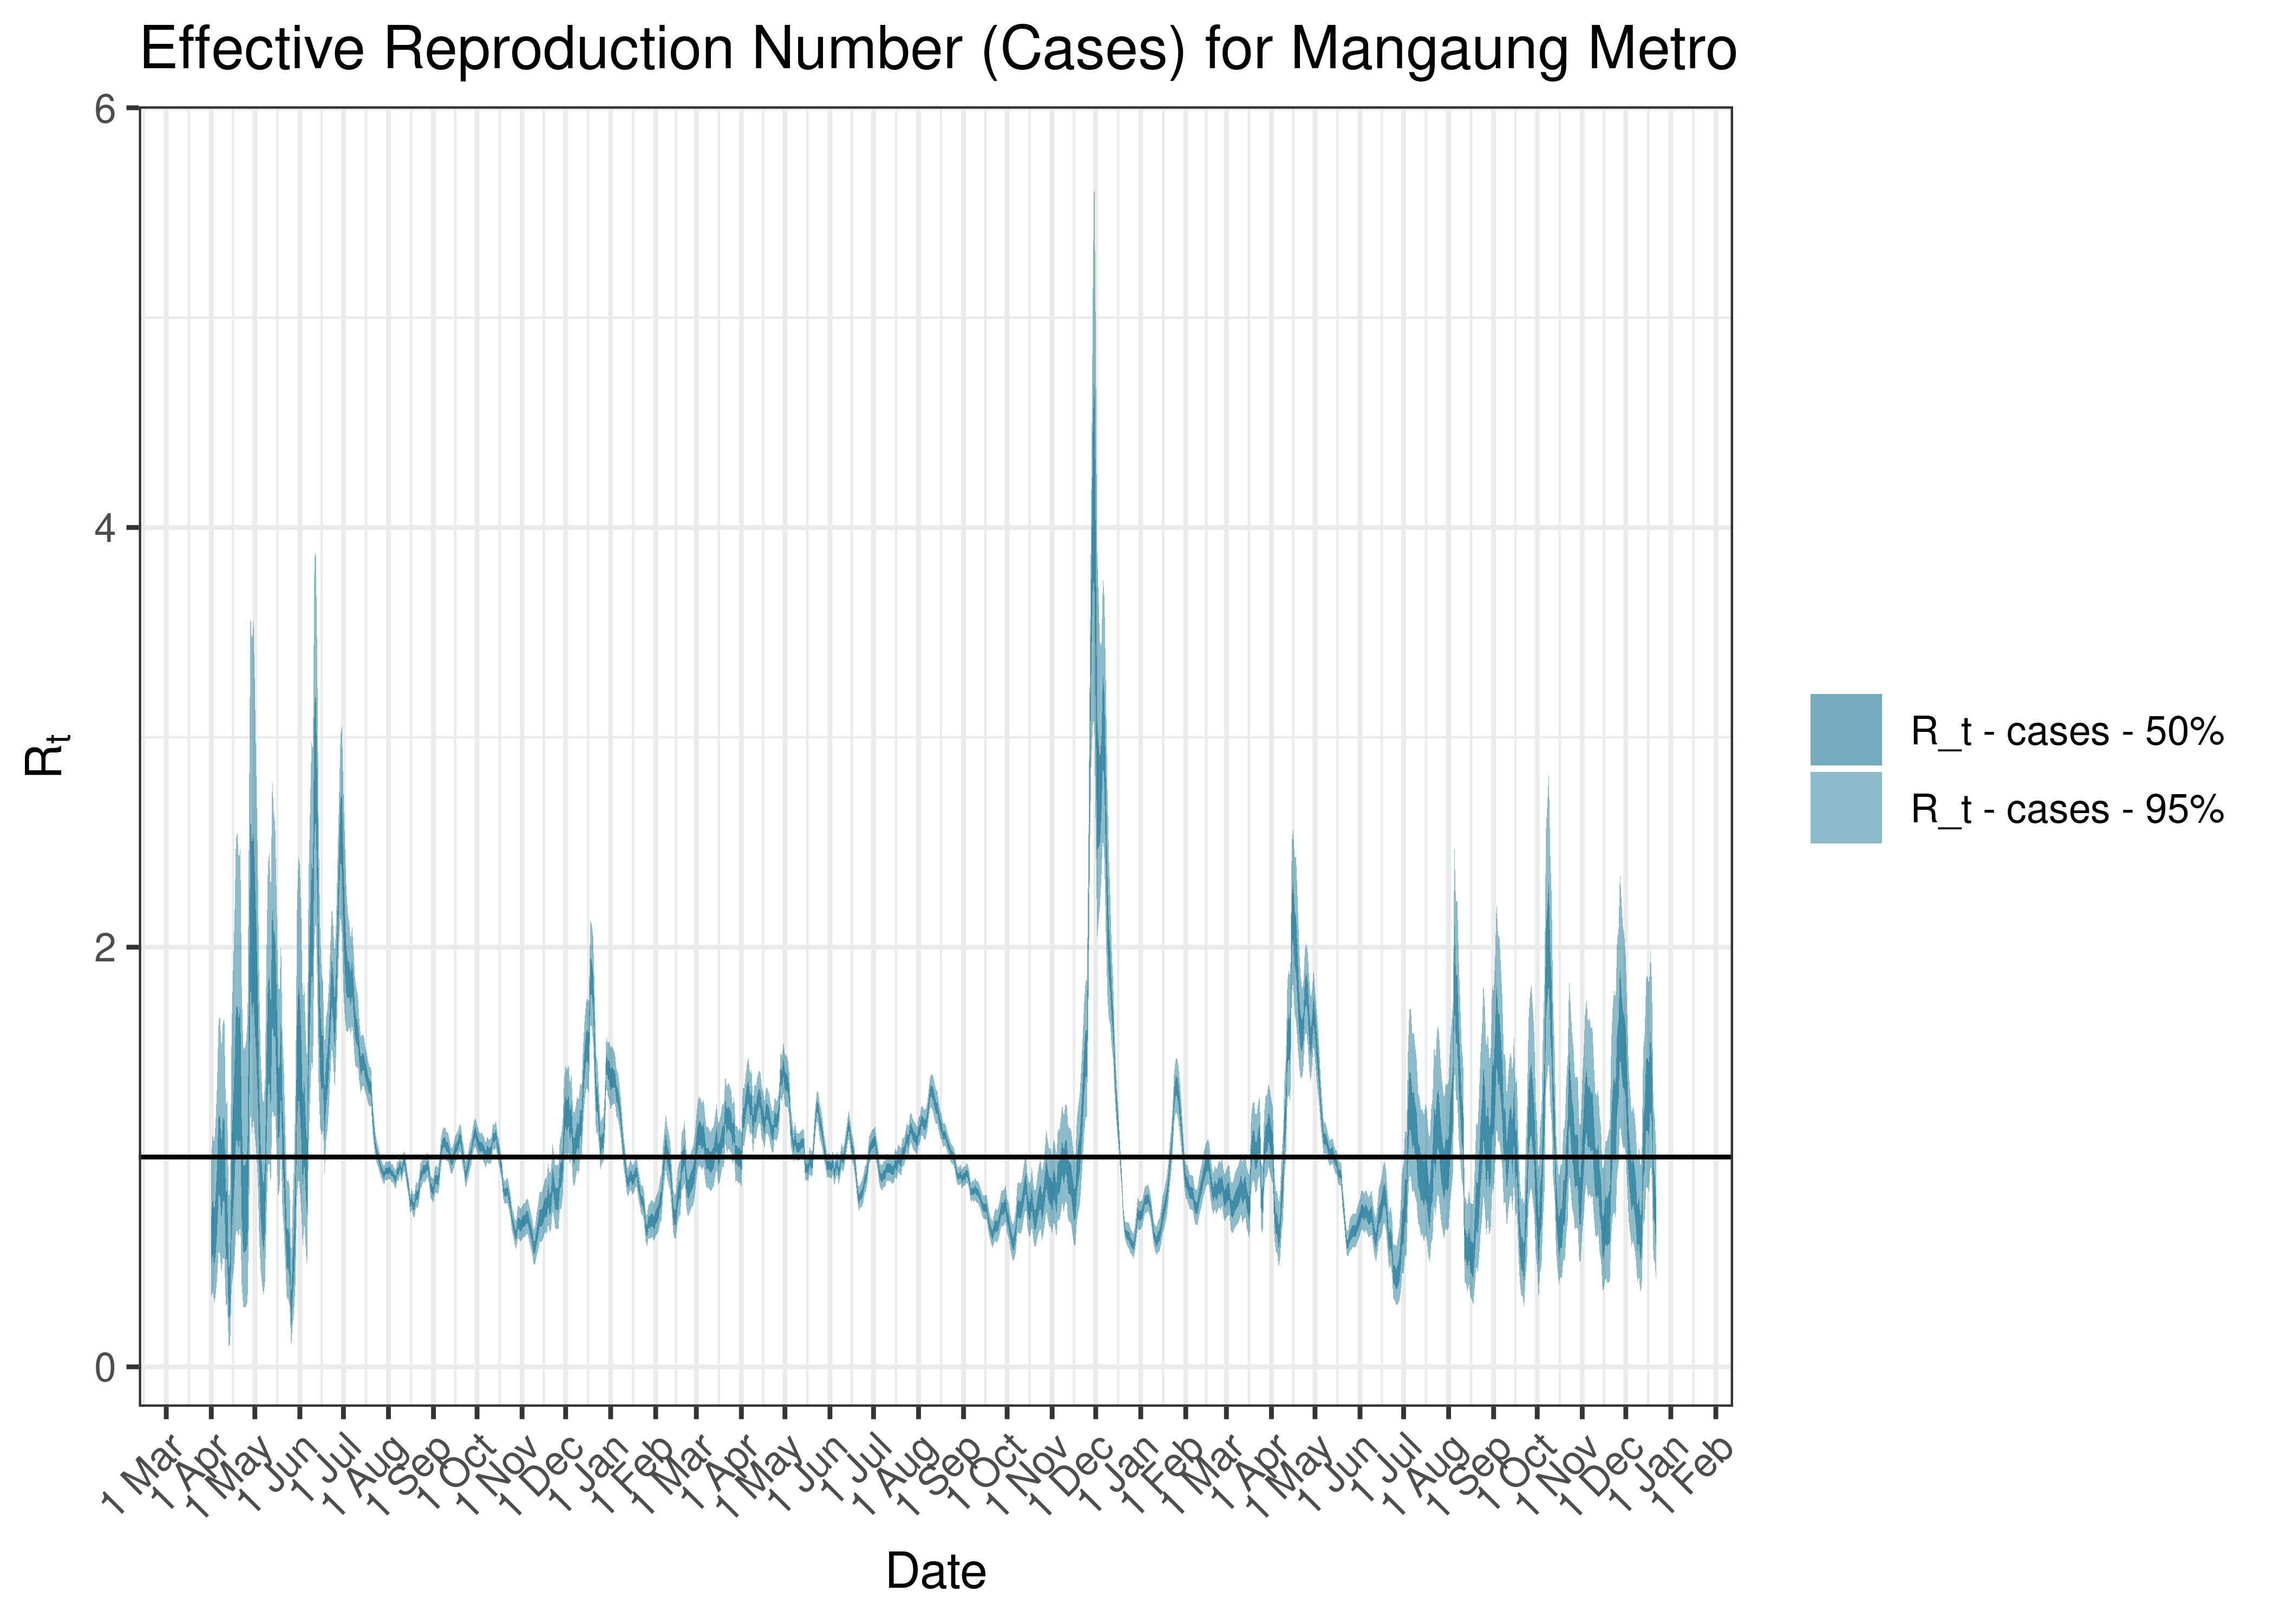 Estimated Effective Reproduction Number Based on Cases for Mangaung Metro since 1 April 2020